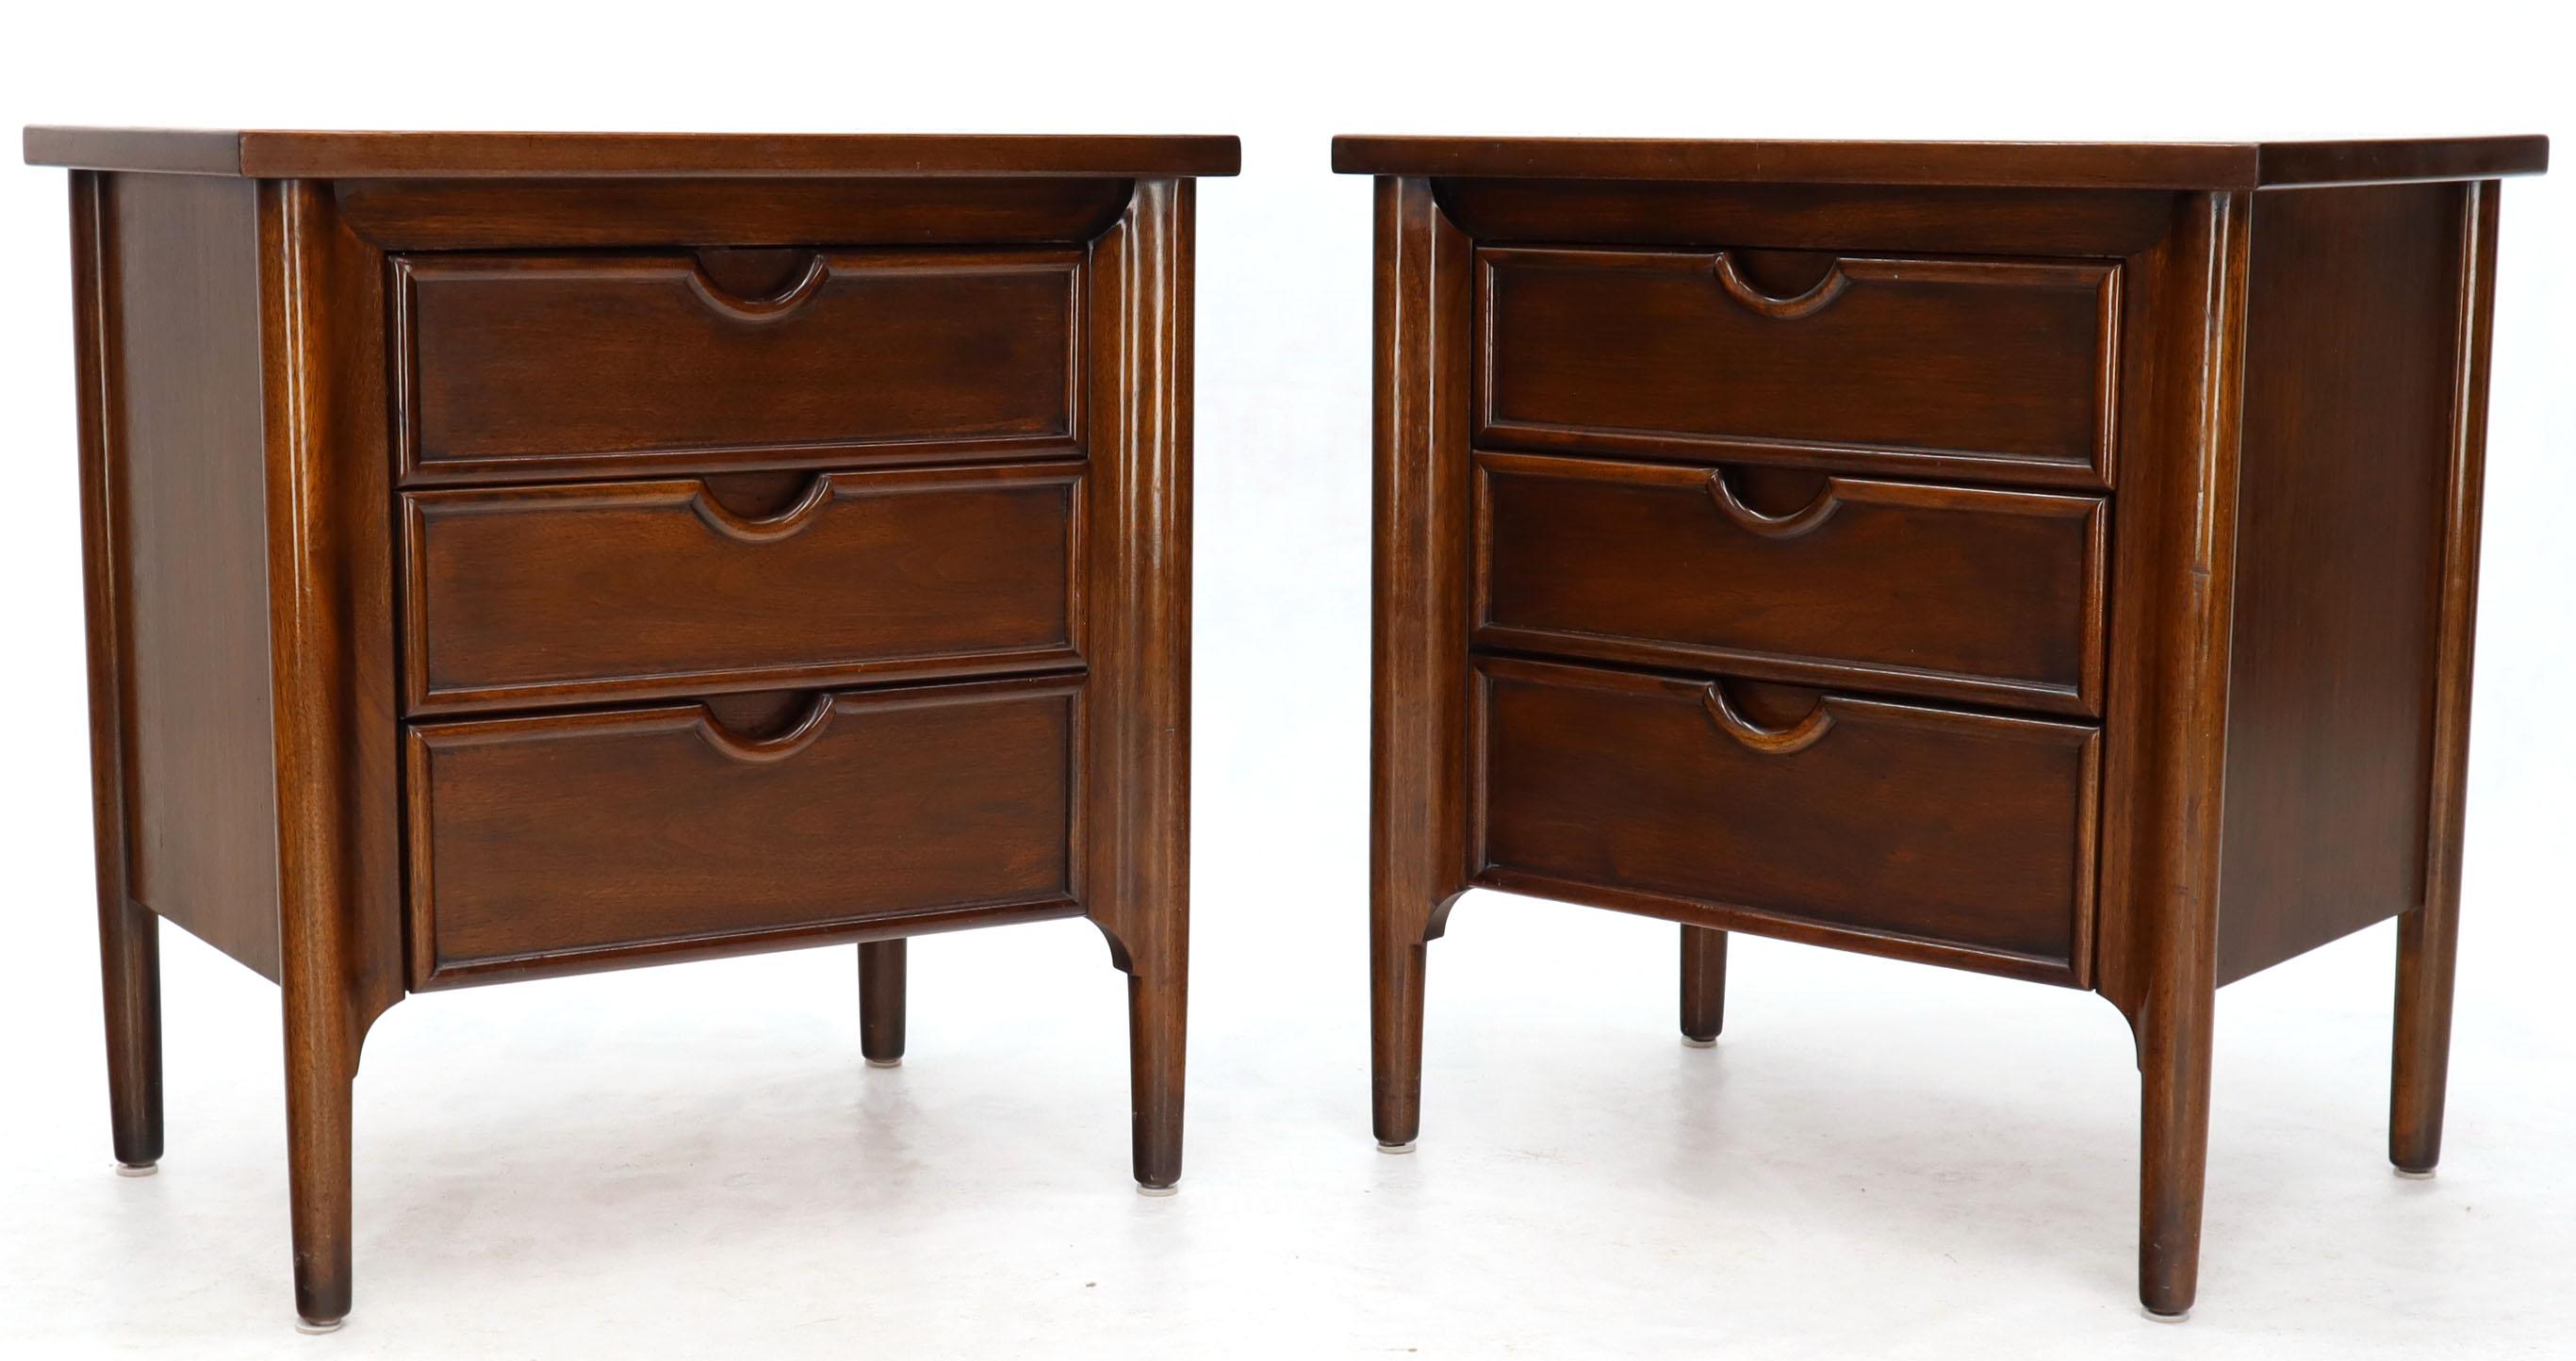 Pair of Exposed Sculptural Legs Three Drawers Nightstands End Tables Stands In Excellent Condition For Sale In Rockaway, NJ